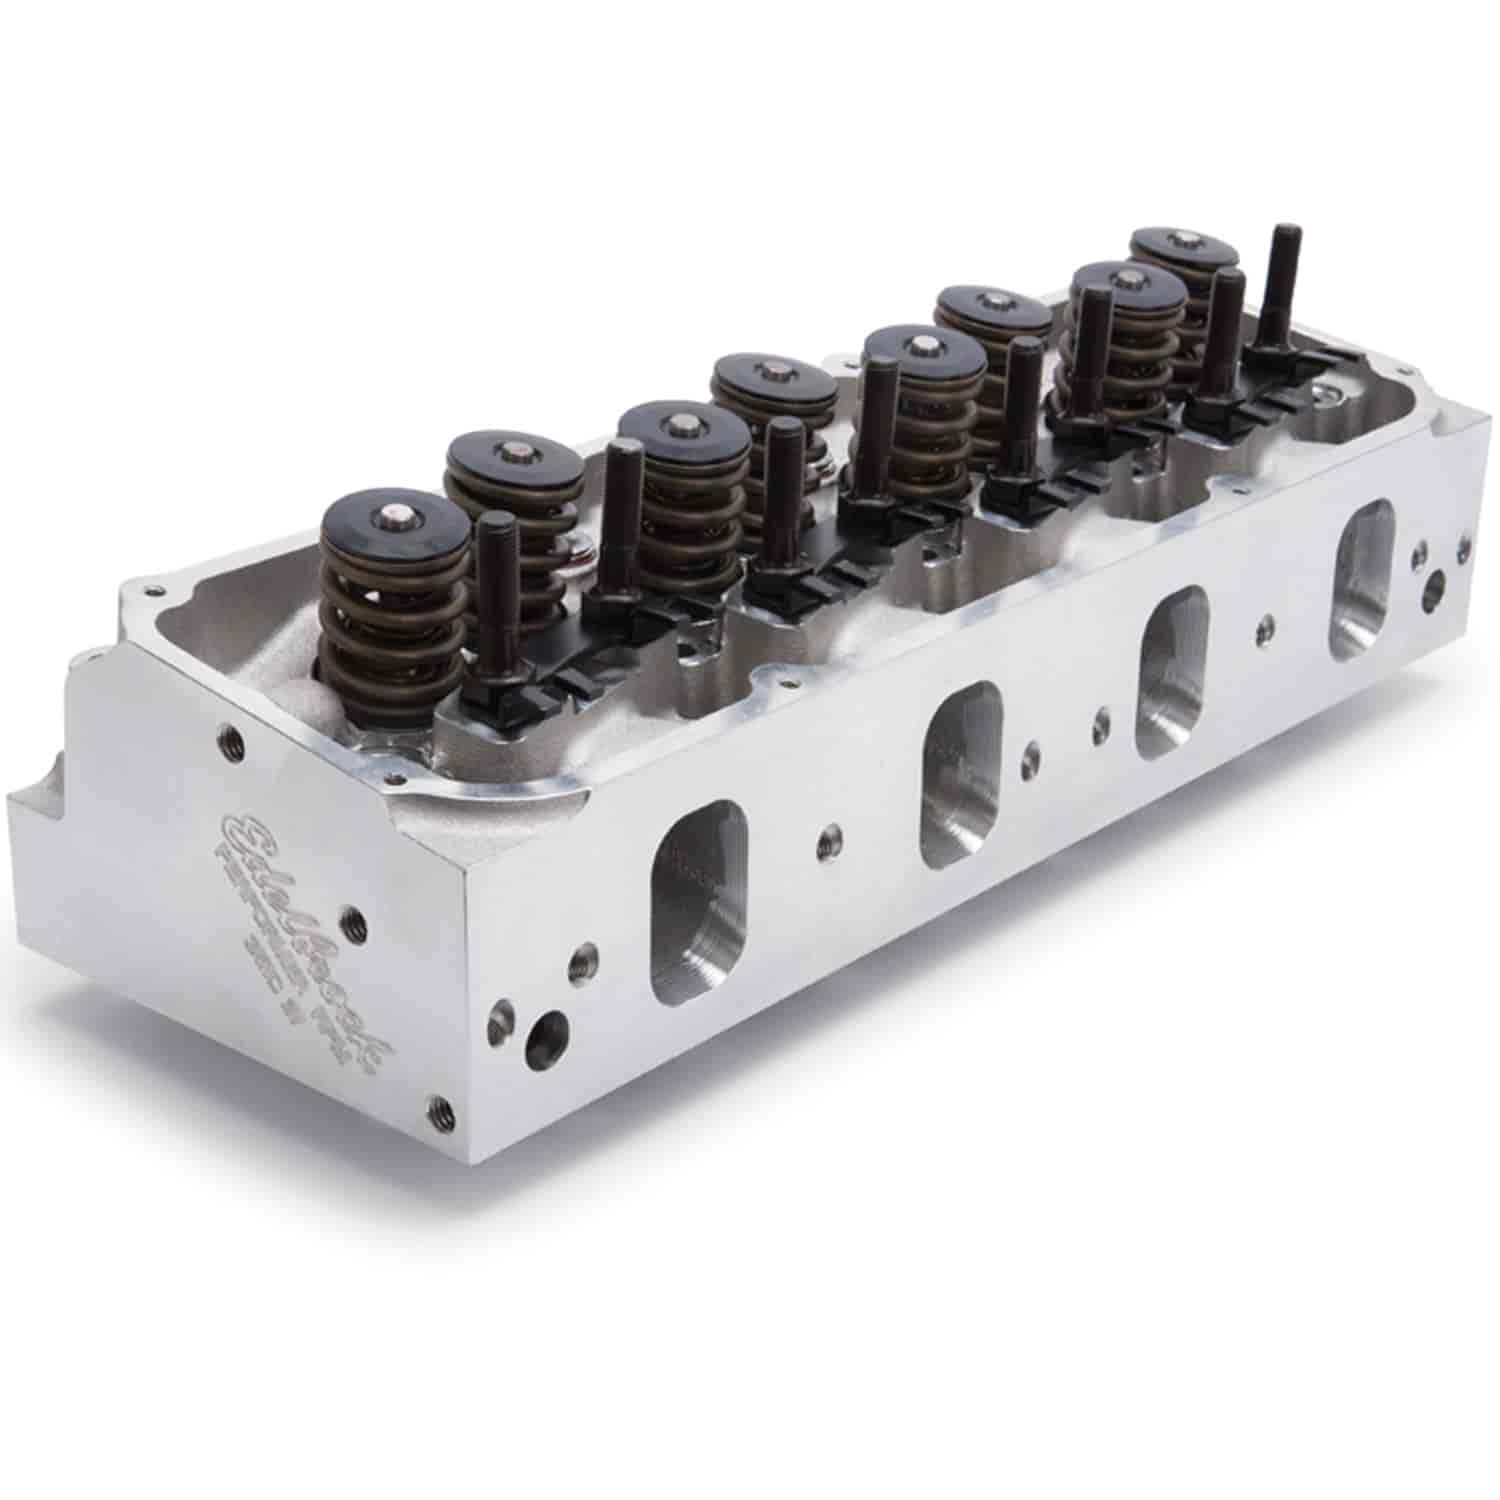 Performer RPM Clevor Cylinder Heads for Small Block Ford